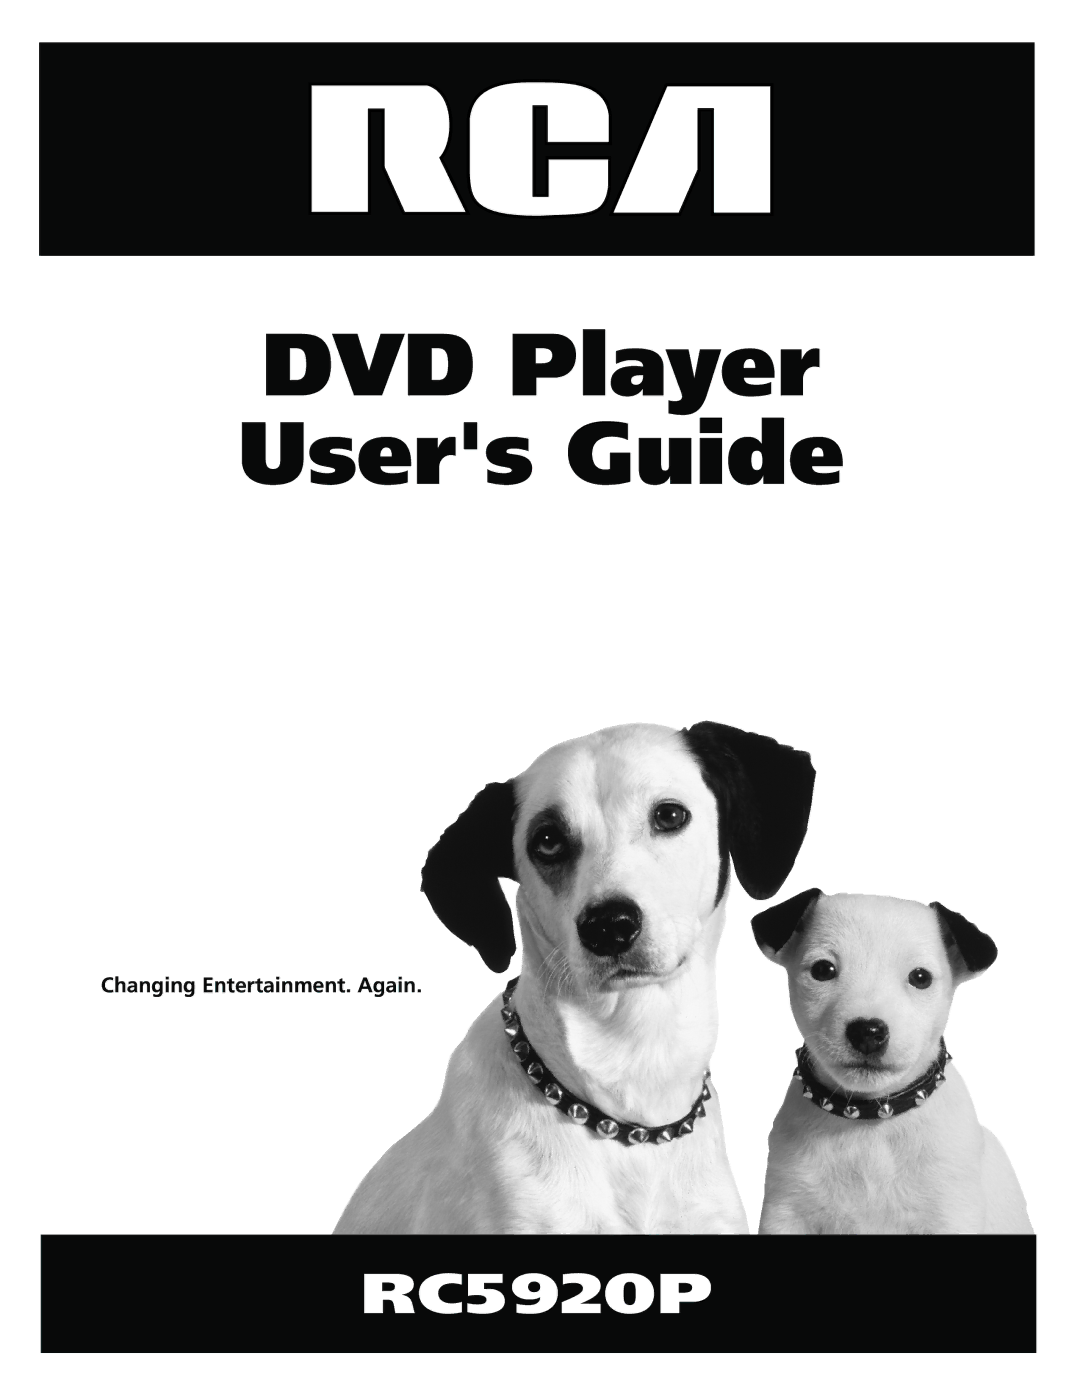 Technicolor - Thomson RC5920P manual DVD Player Users Guide, Changing Entertainment. Again 